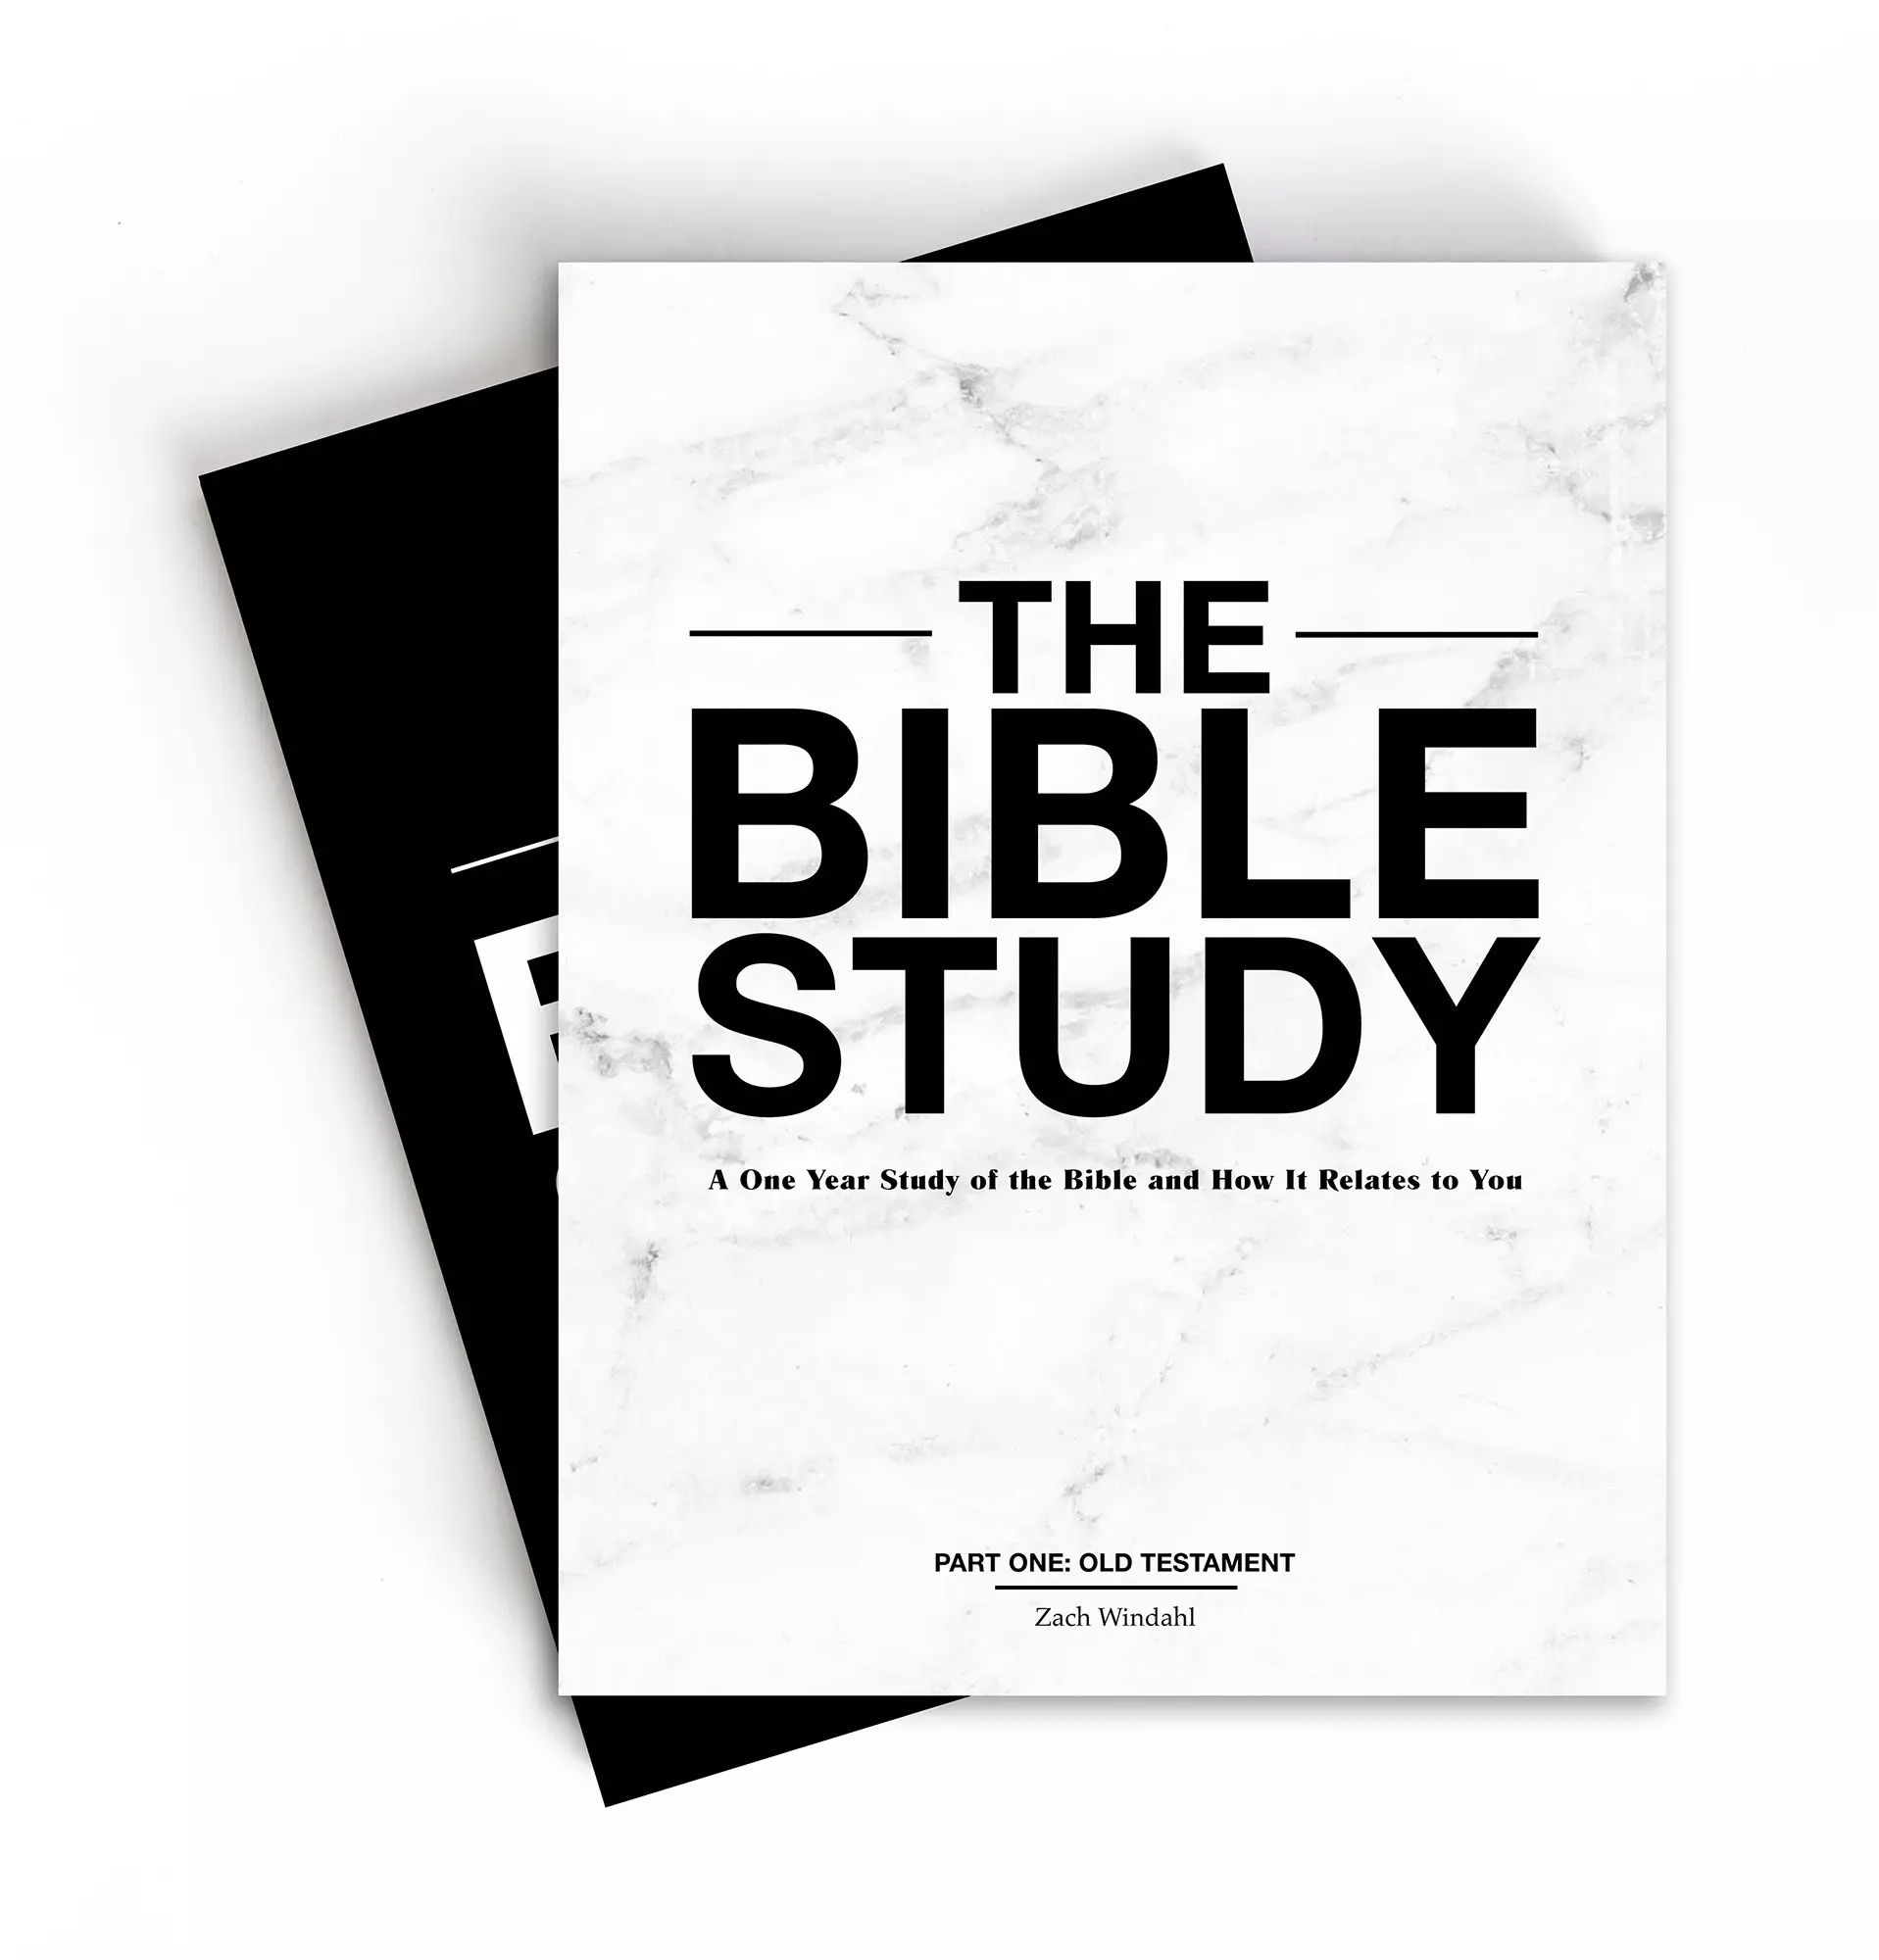 The Bible Study